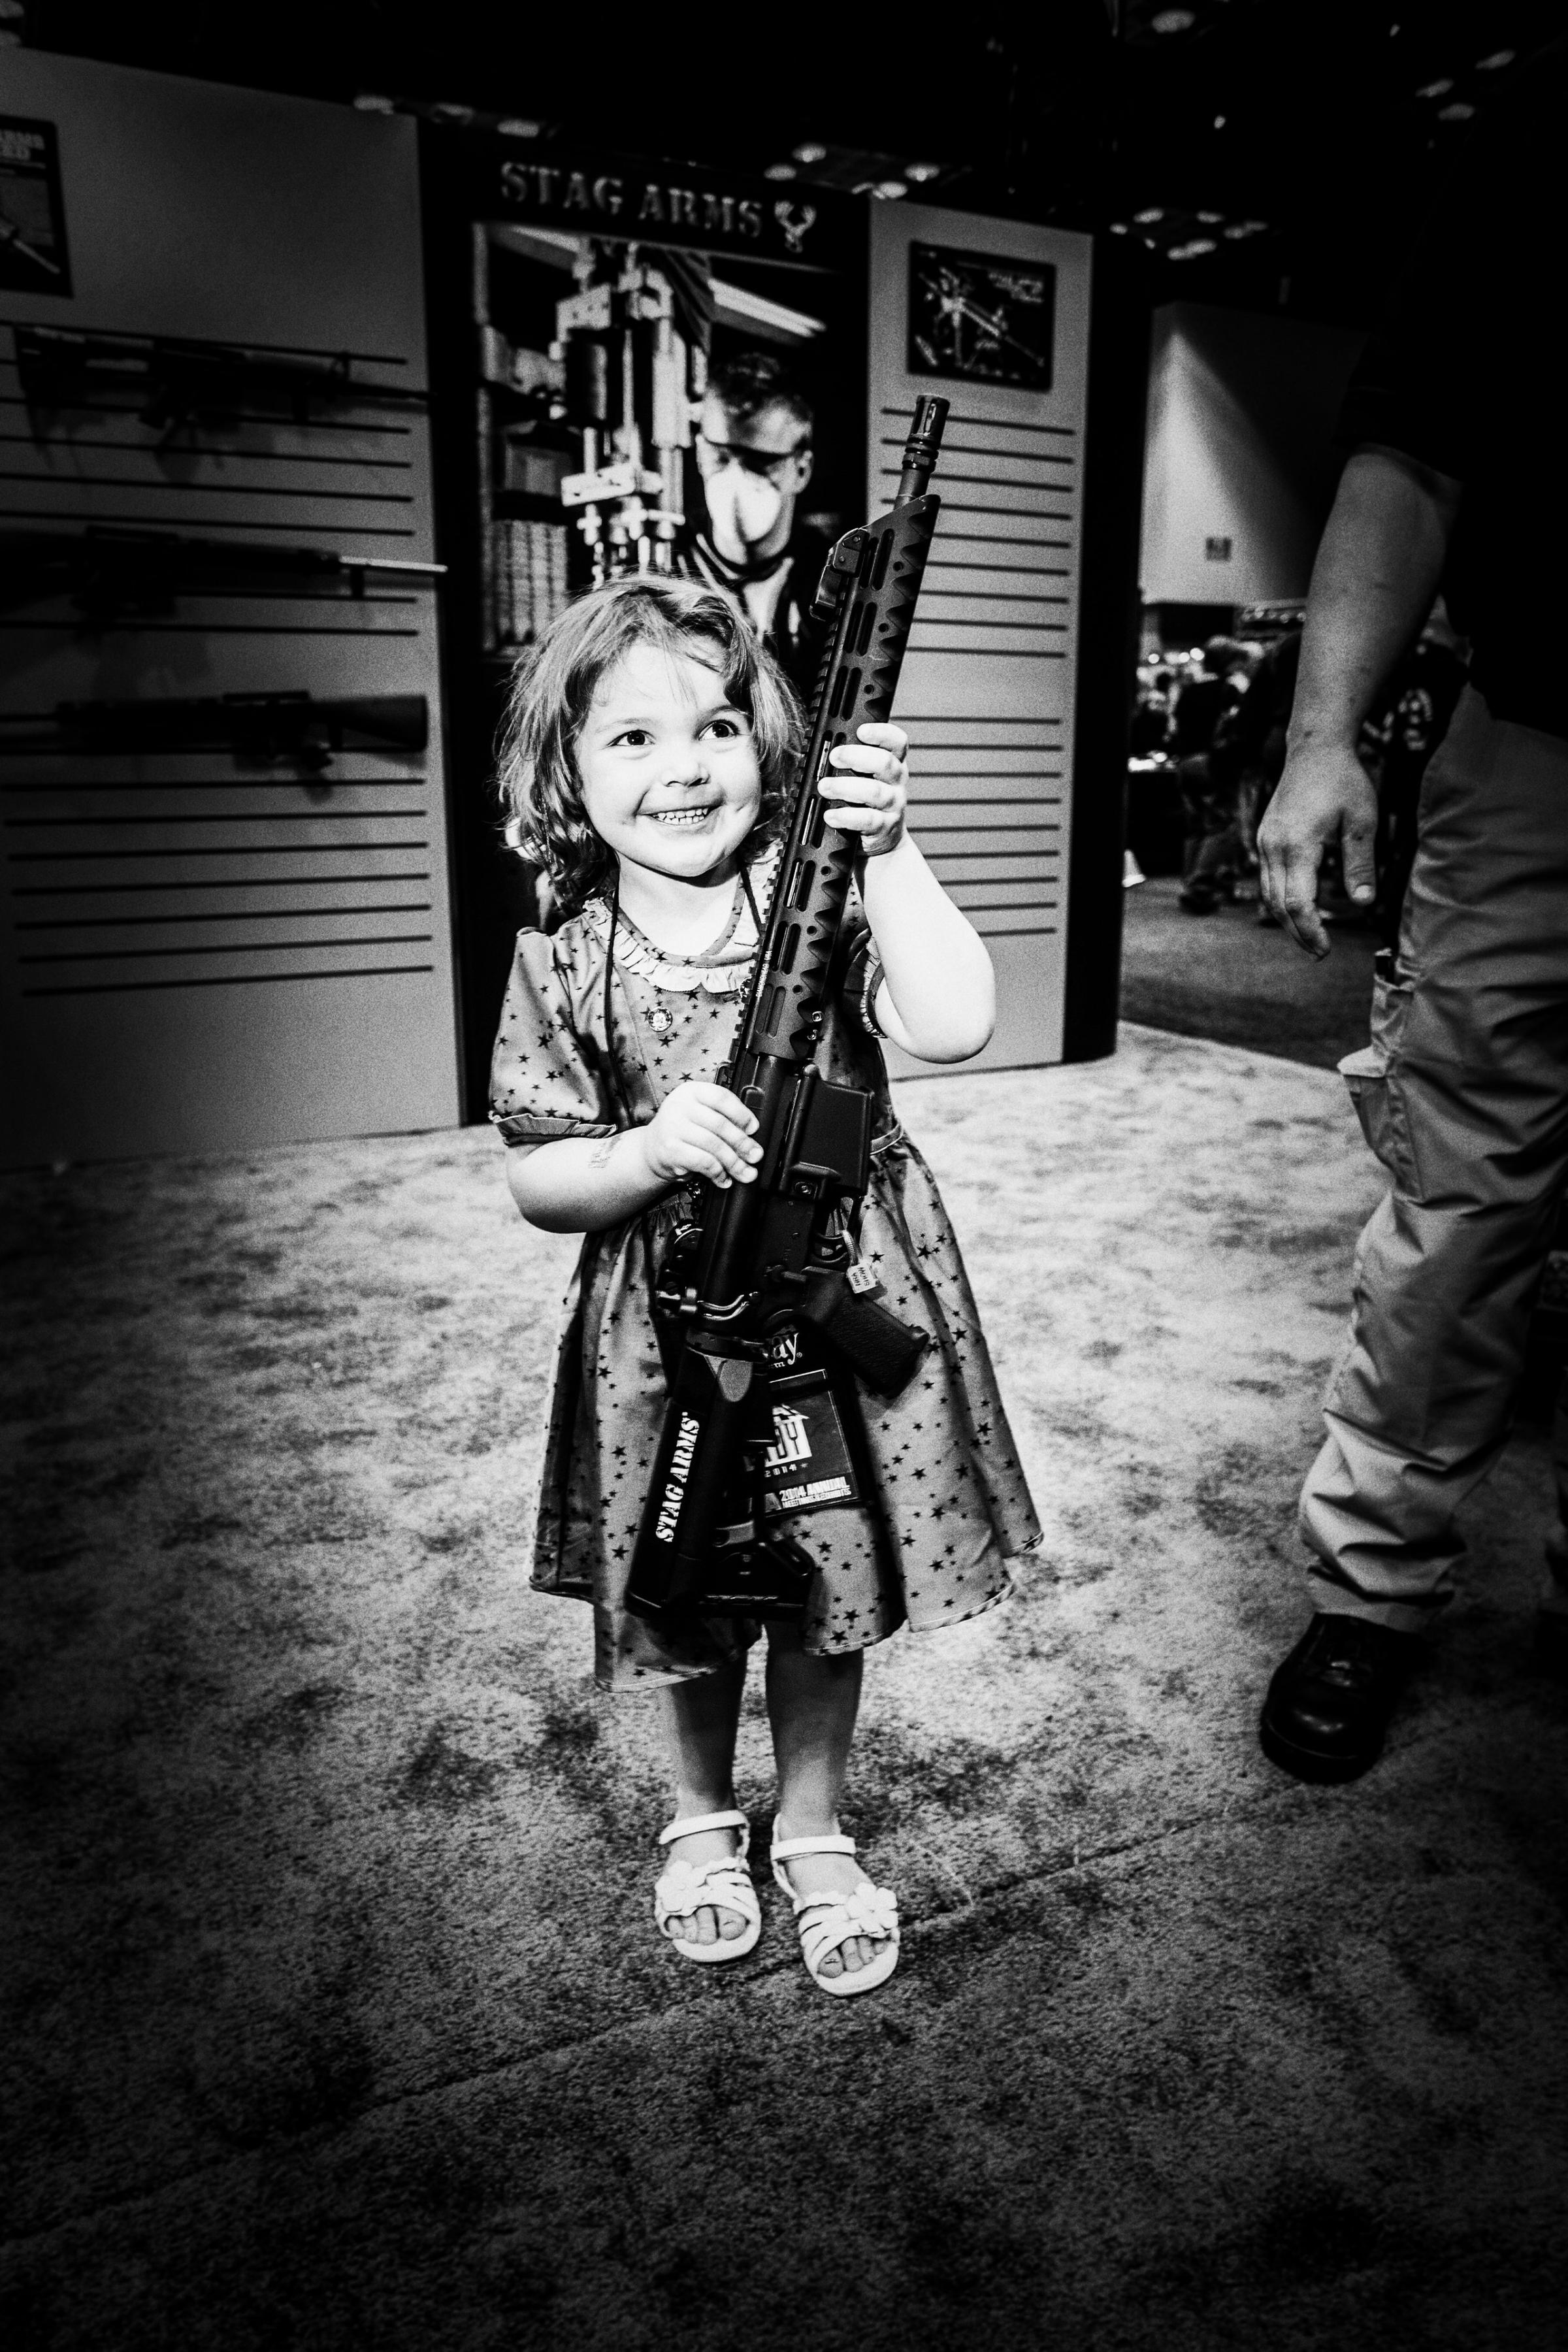 The National Rifle Association annual convention in Indianapolis Indiana.  the exhibit hall was over nine acres of guns and products for guns and over 60,000 people attended the convention.  4 year old violet ogle with a assault rifle on the in the exhibitors hall that her parents wanted to take a picture with her holding